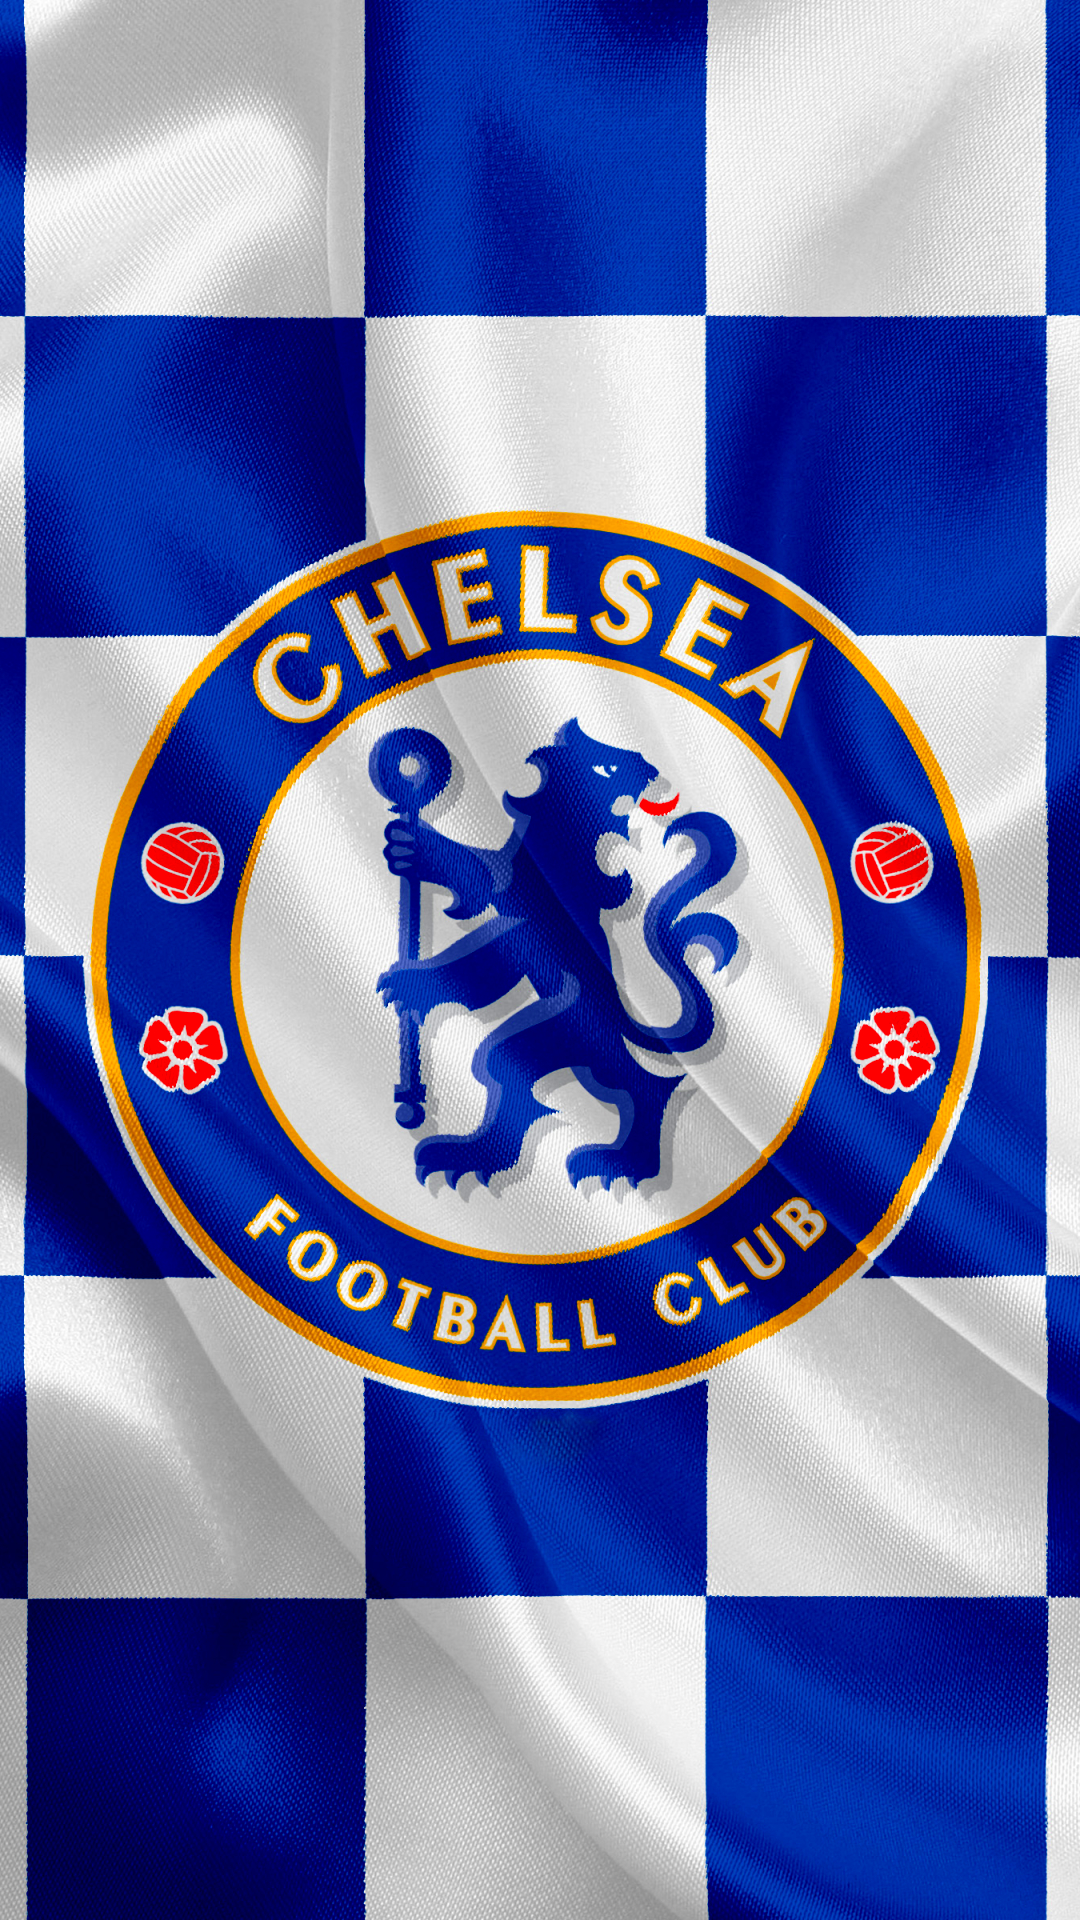 Chelsea Fc Badge Wallpaper / 70 Fa Cup Wallpaper From Fb Promo Video